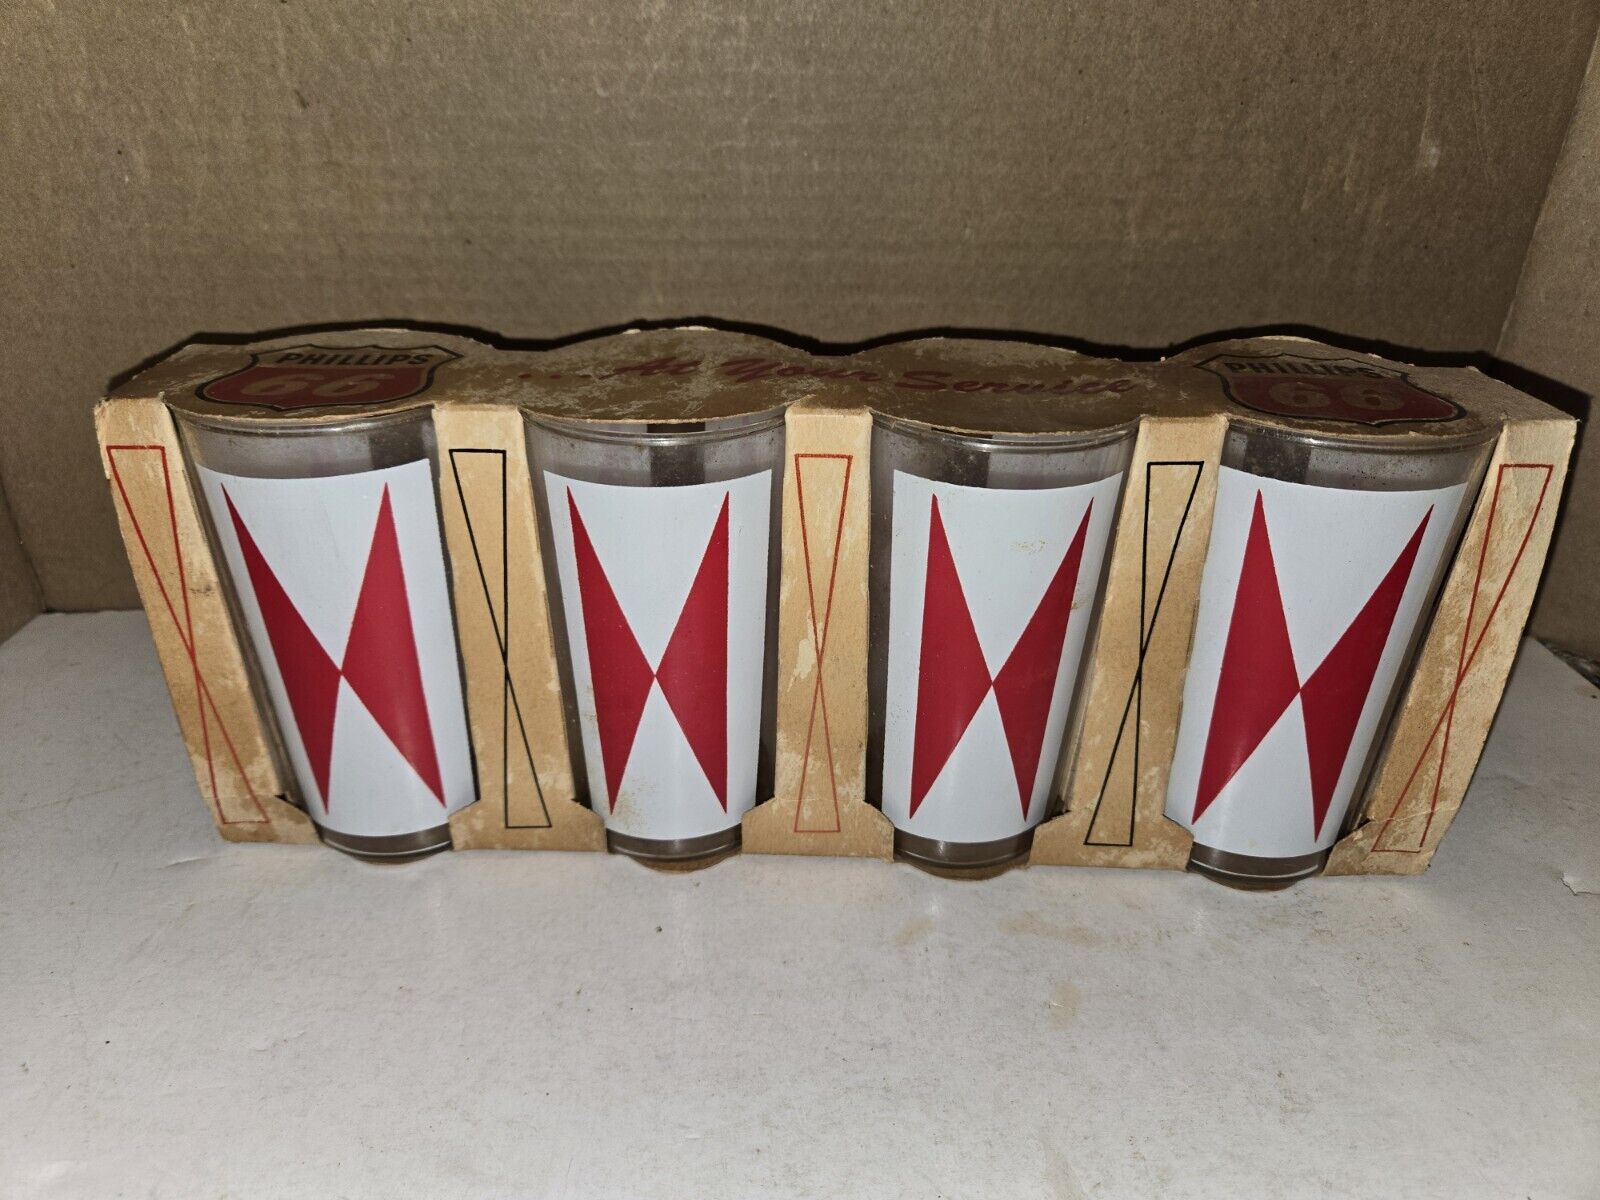 Vintage 1965 Phillips 66 Gas Service Station Promo Drinking Glass Set,Packaging